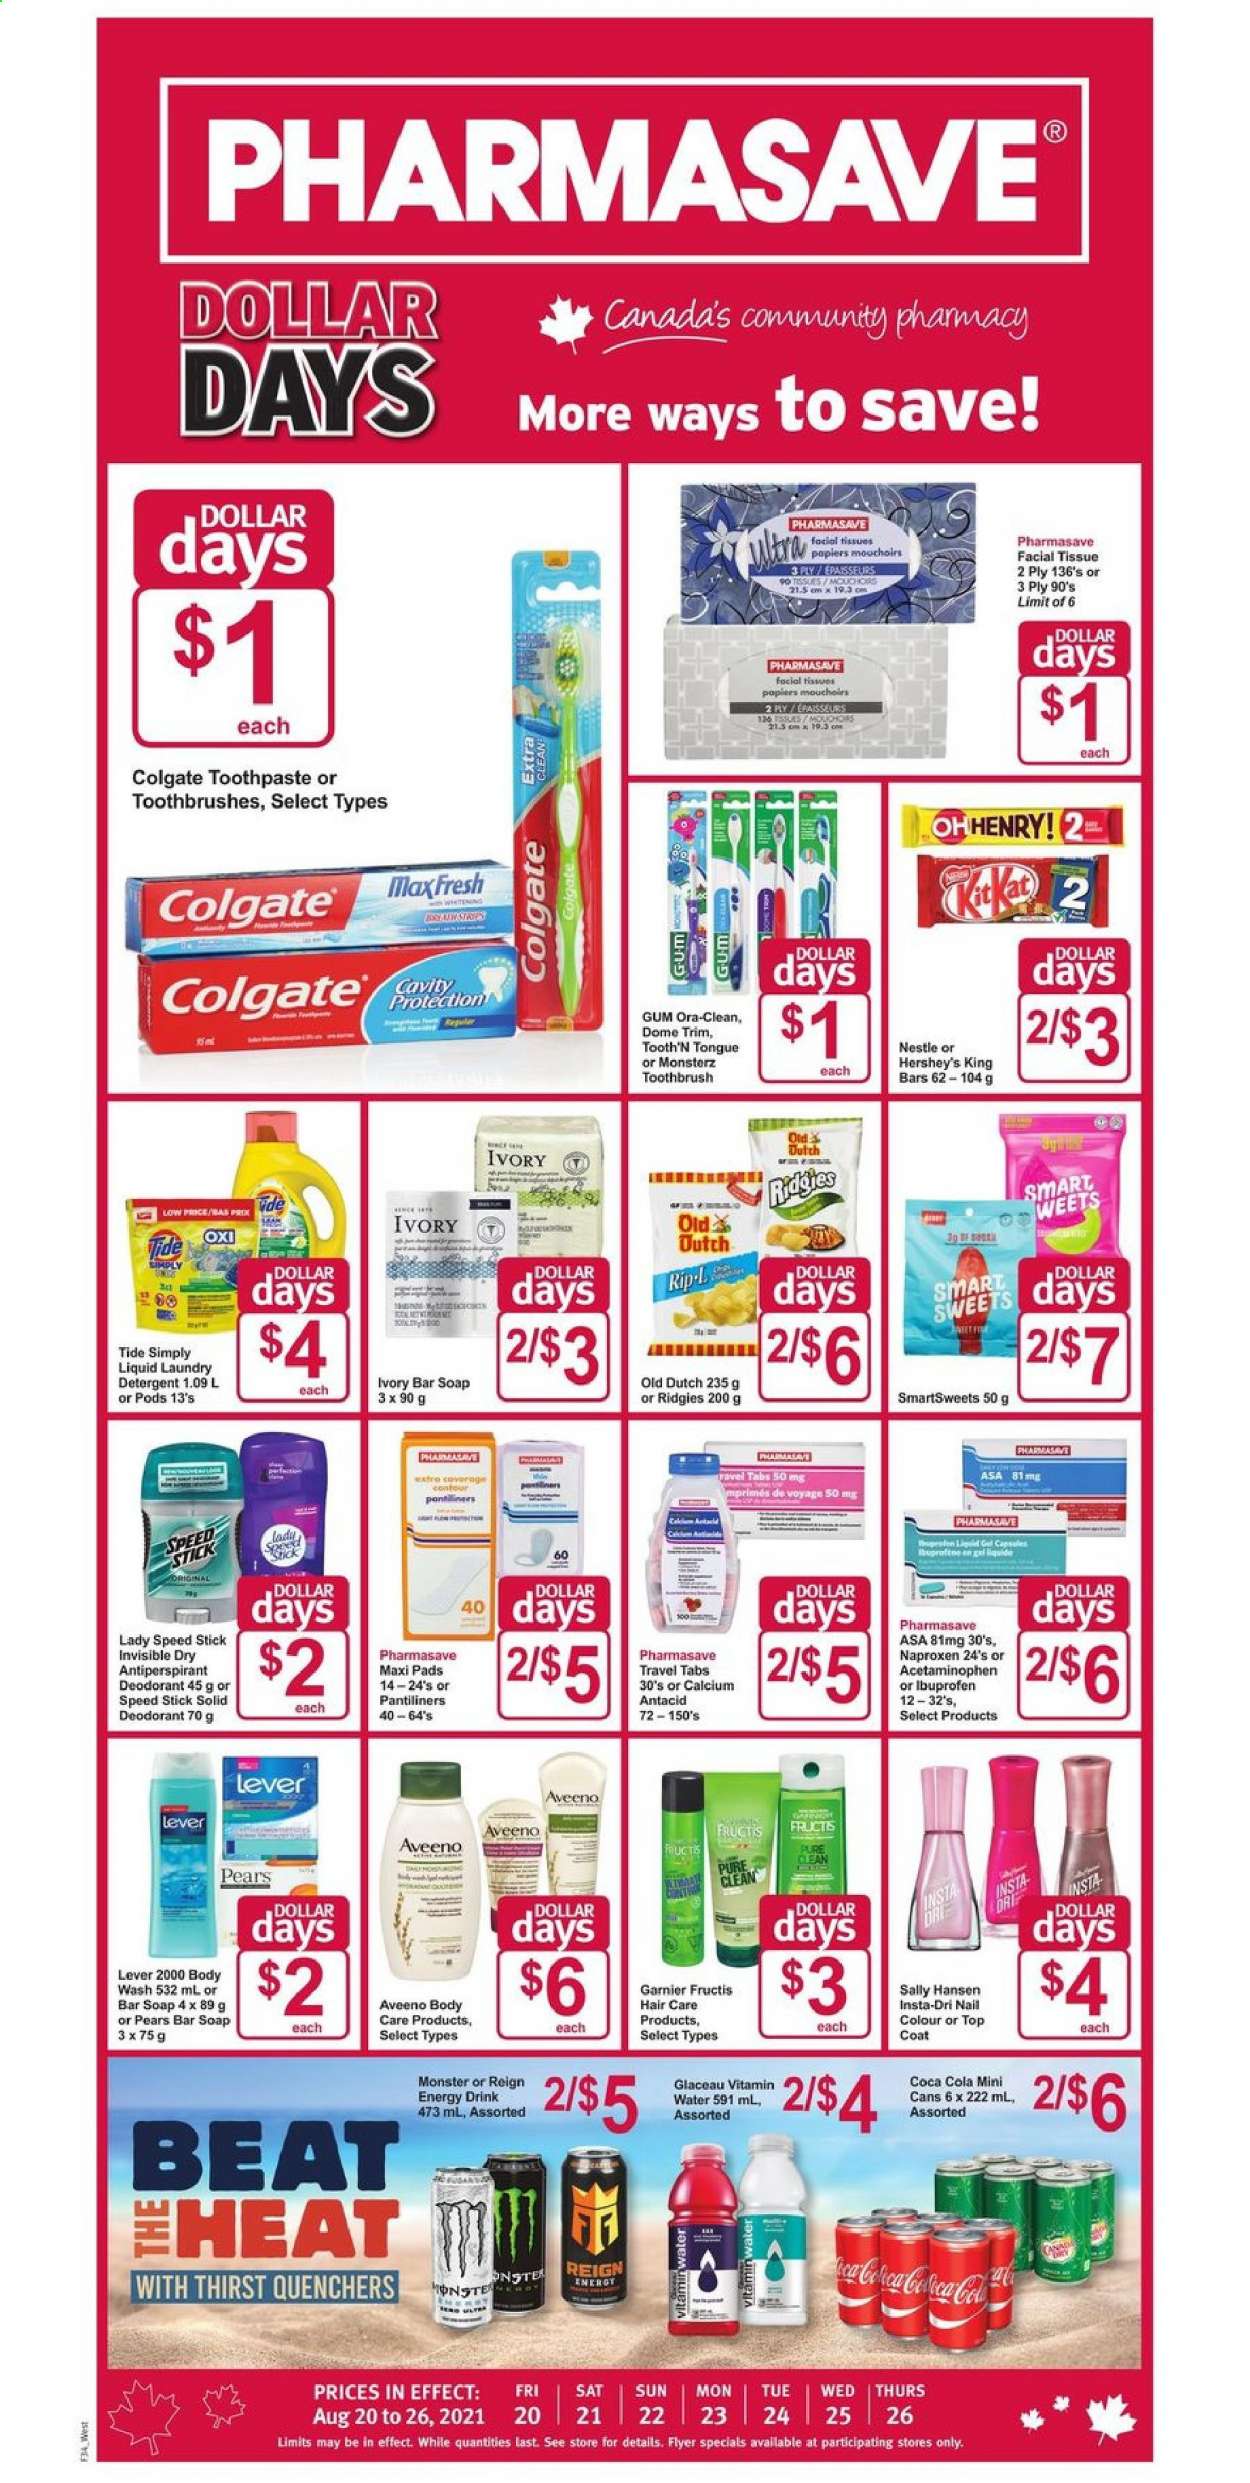 thumbnail - Pharmasave Flyer - August 20, 2021 - August 26, 2021 - Sales products - pears, Hershey's, Coca-Cola, energy drink, Monster, vitamin water, Aveeno, tissues, Tide, laundry detergent, body wash, soap bar, soap, toothbrush, toothpaste, pantiliners, sanitary pads, facial tissues, Fructis, anti-perspirant, Speed Stick, top coat, contour, coat, Ibuprofen, Antacid, Nestlé, Garnier, Sally Hansen, deodorant. Page 1.